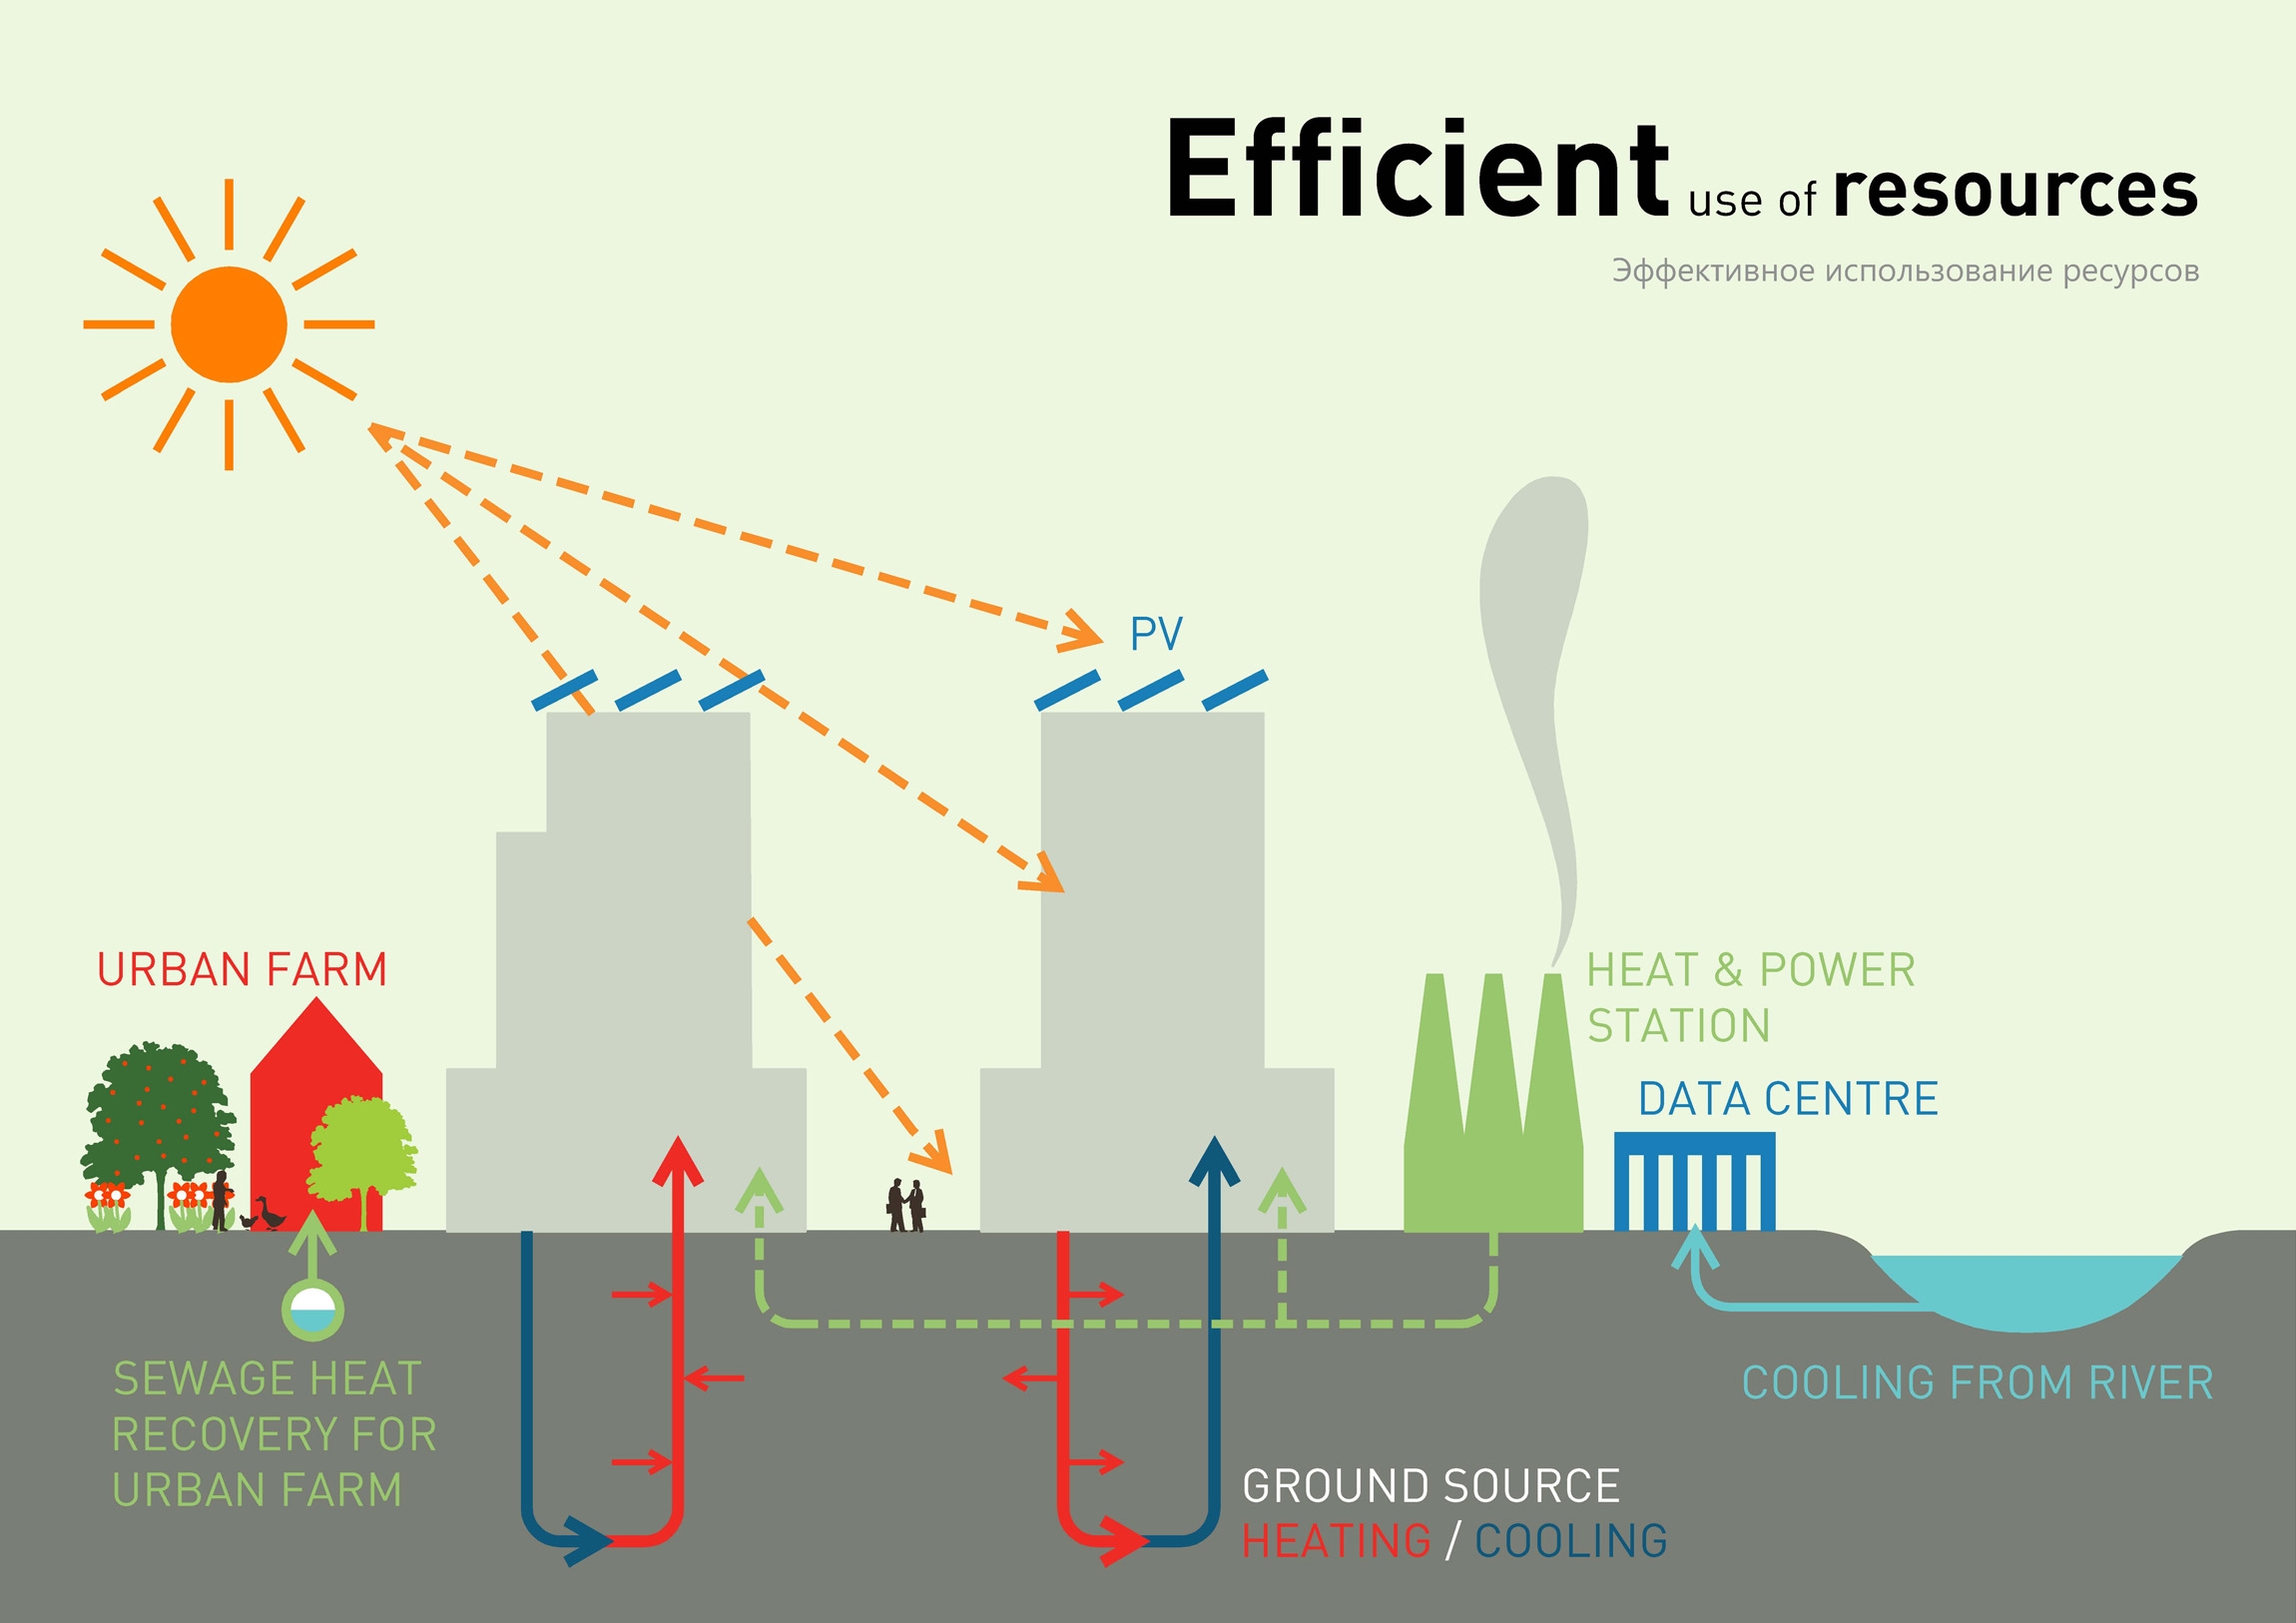 Natural resource use. Efficient Energy use. Efficient. Natural resources use. Energy efficiency.